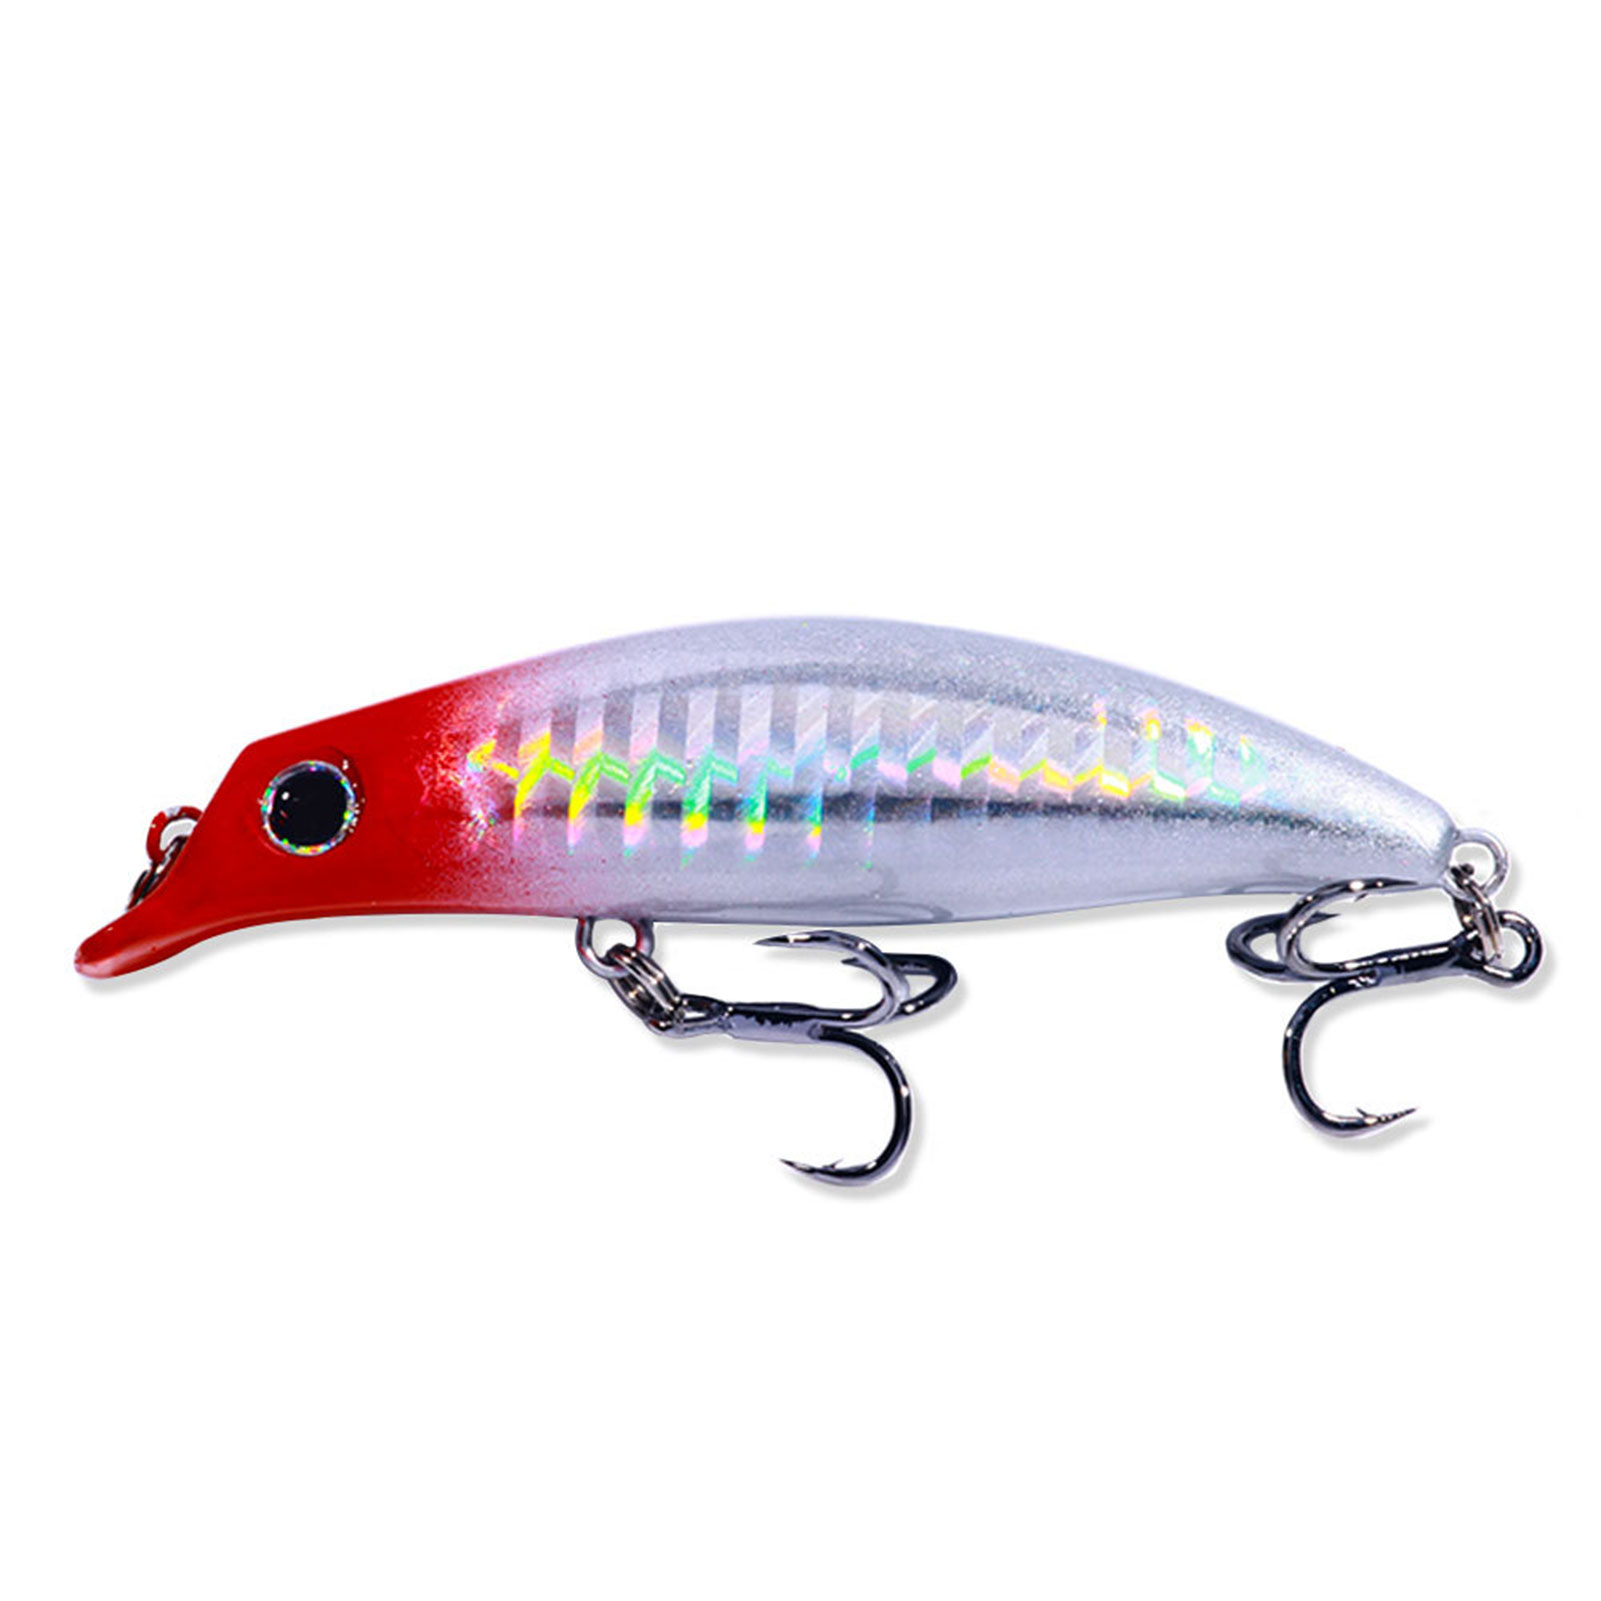 Topwater Soft Plastic Lures Baits All-purpose Fishing Lures For